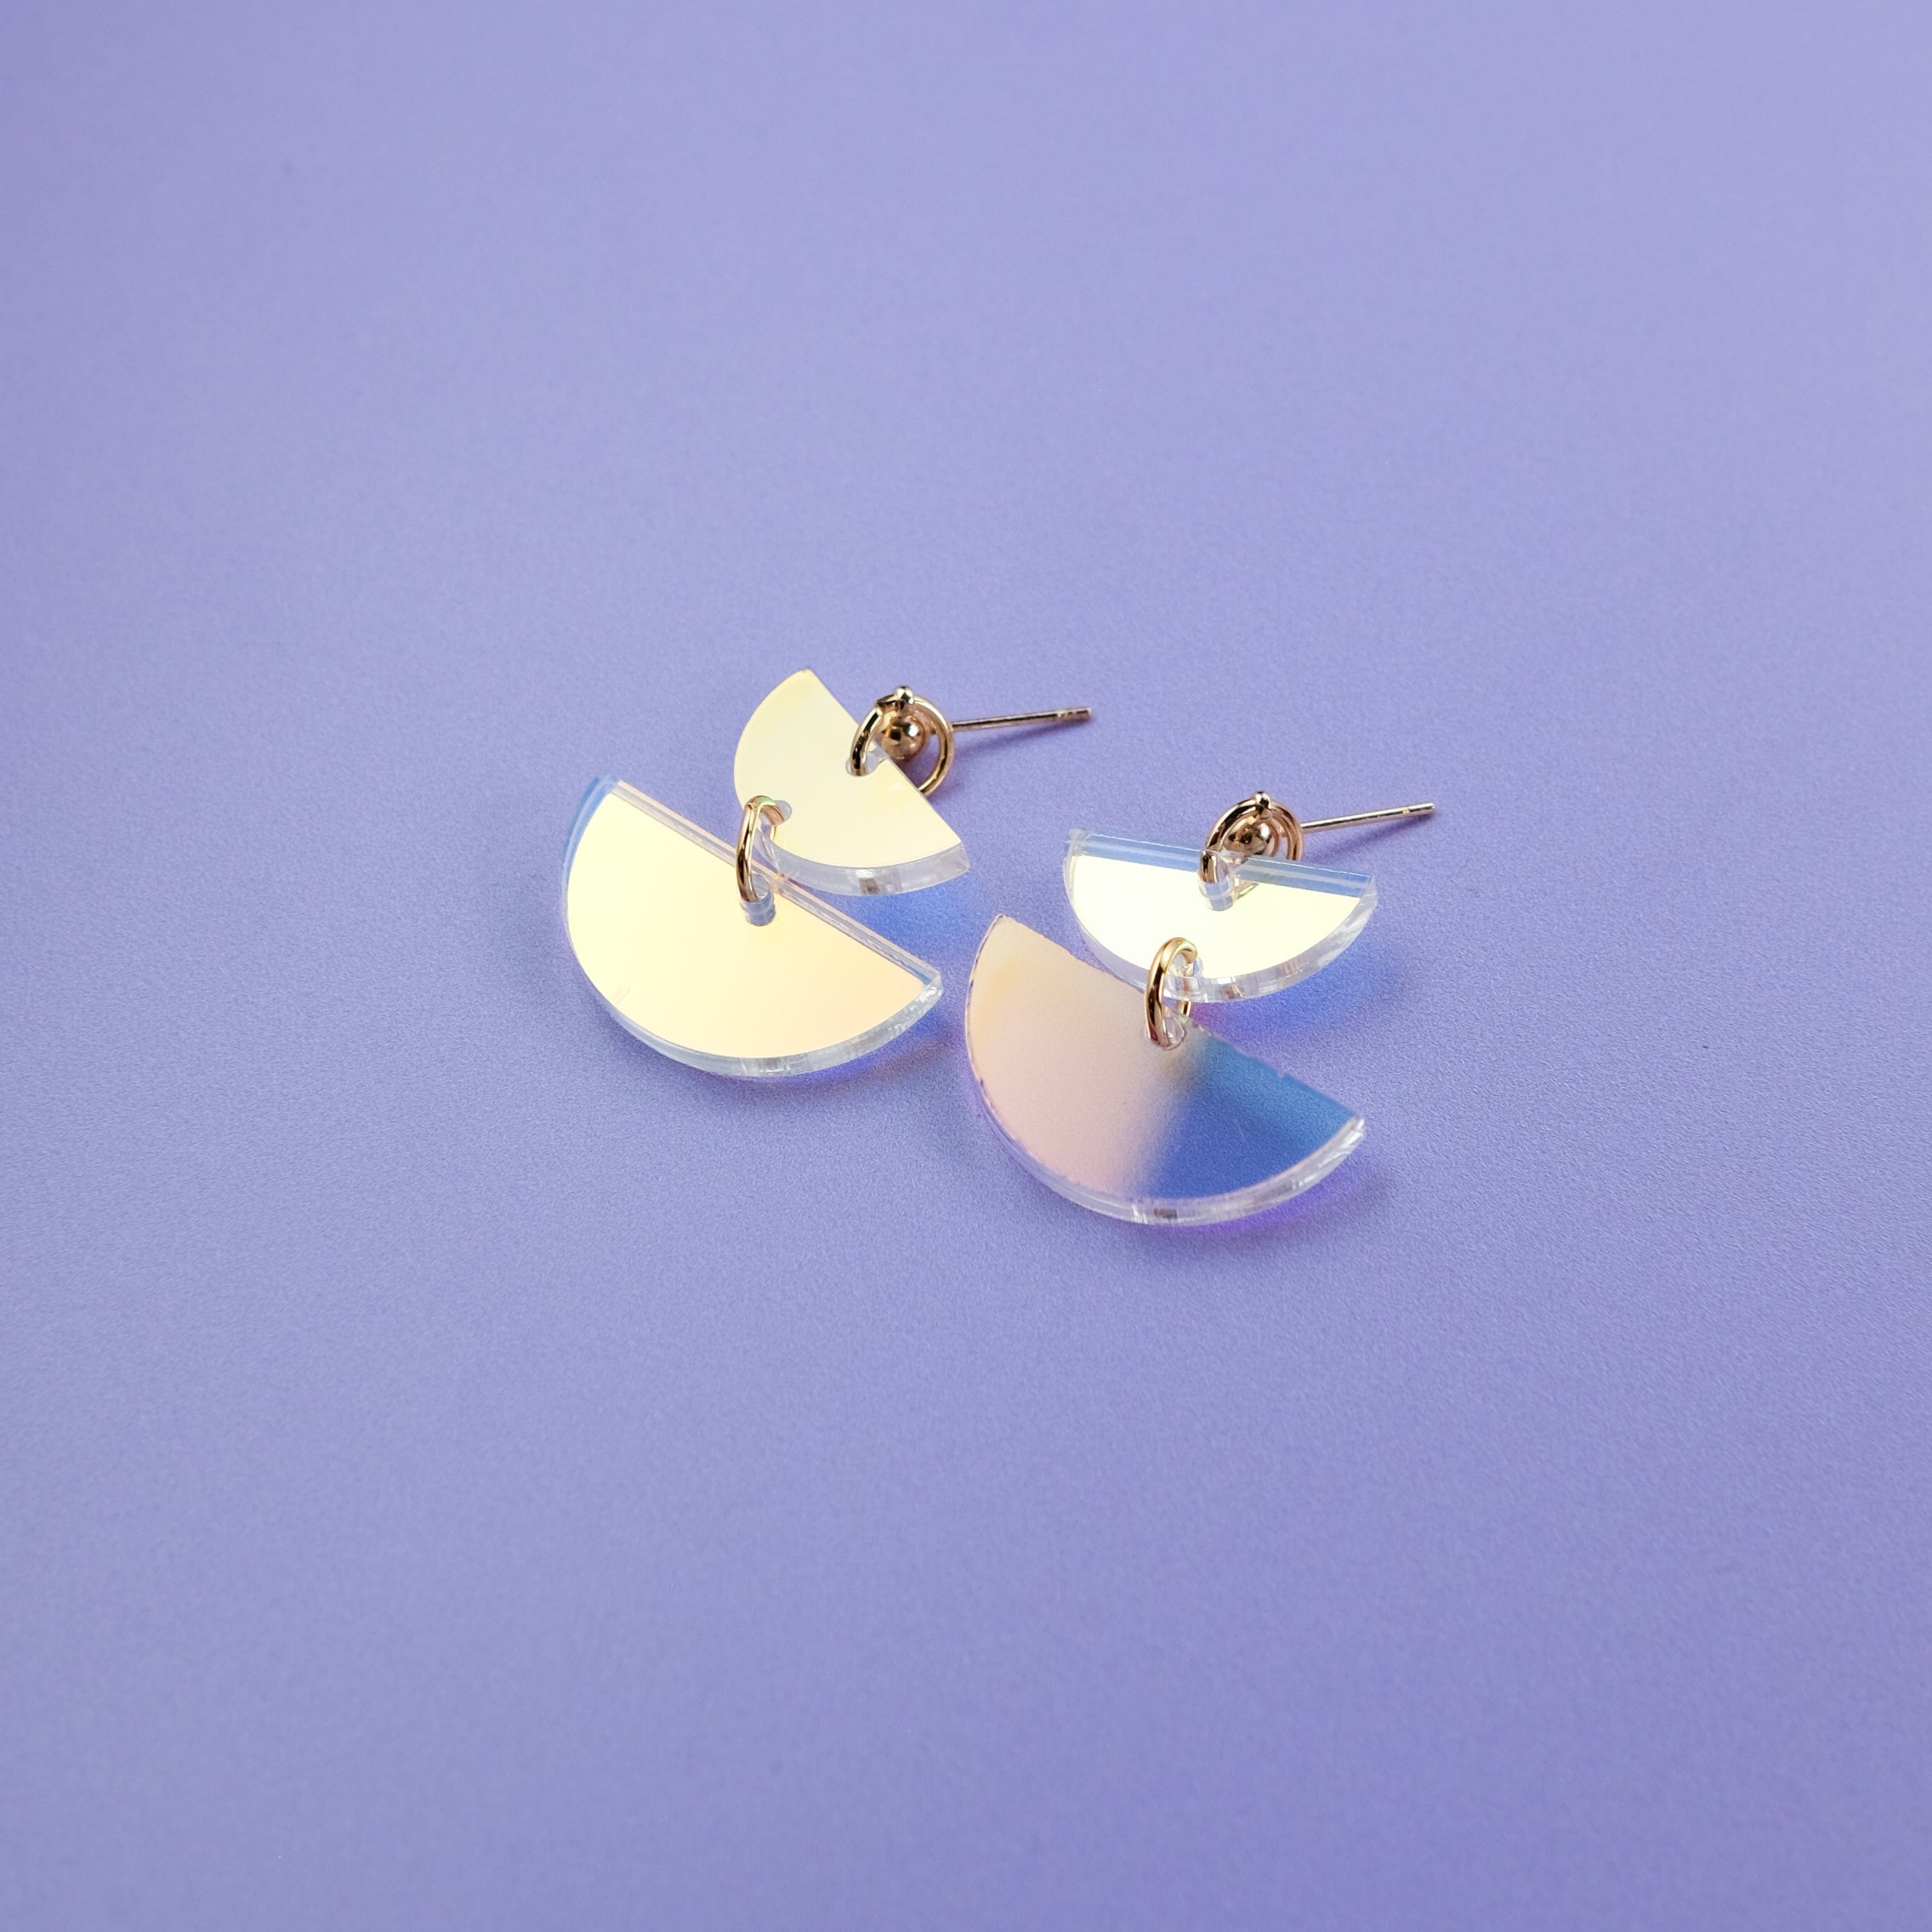 Twin Luna cute dangly half-moon shaped earrings in Iridescent #color_iridescent